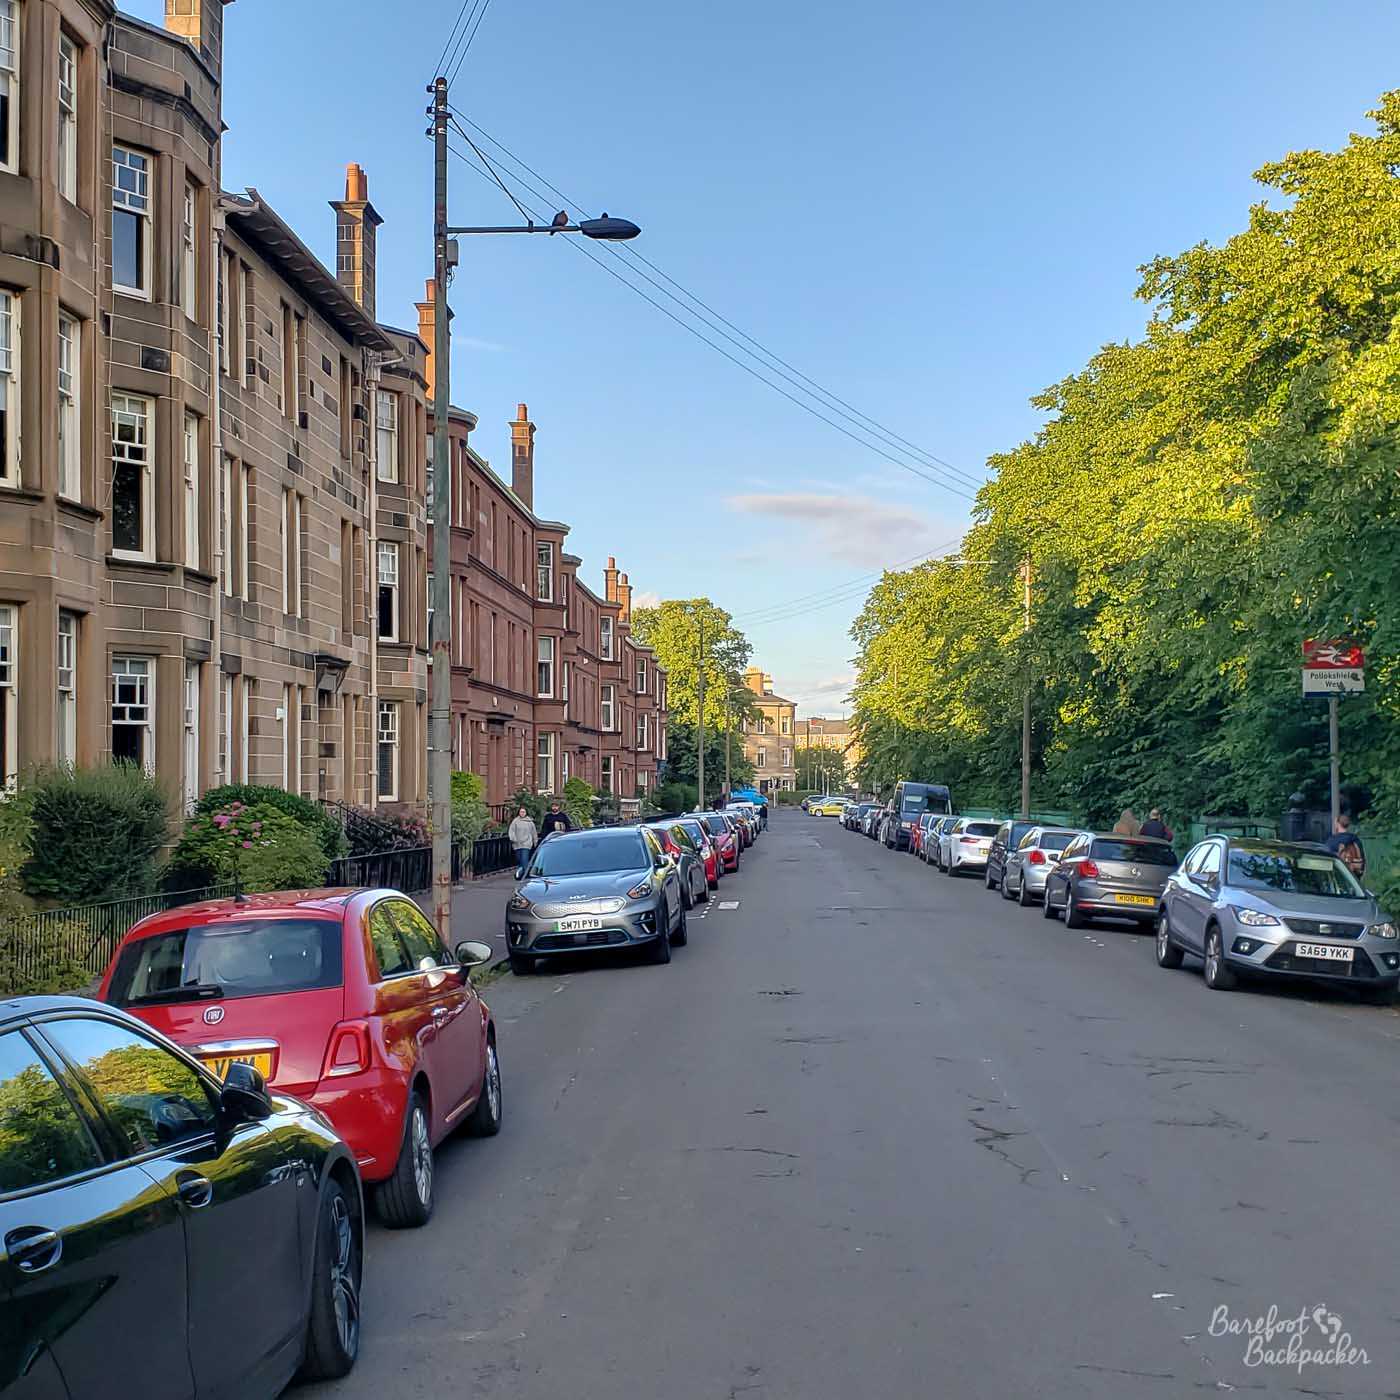 View of a street. On the left of shot is a row of tenement block. On the right are bushes and trees. In the distance is a railway station sign - Pollokshields West.